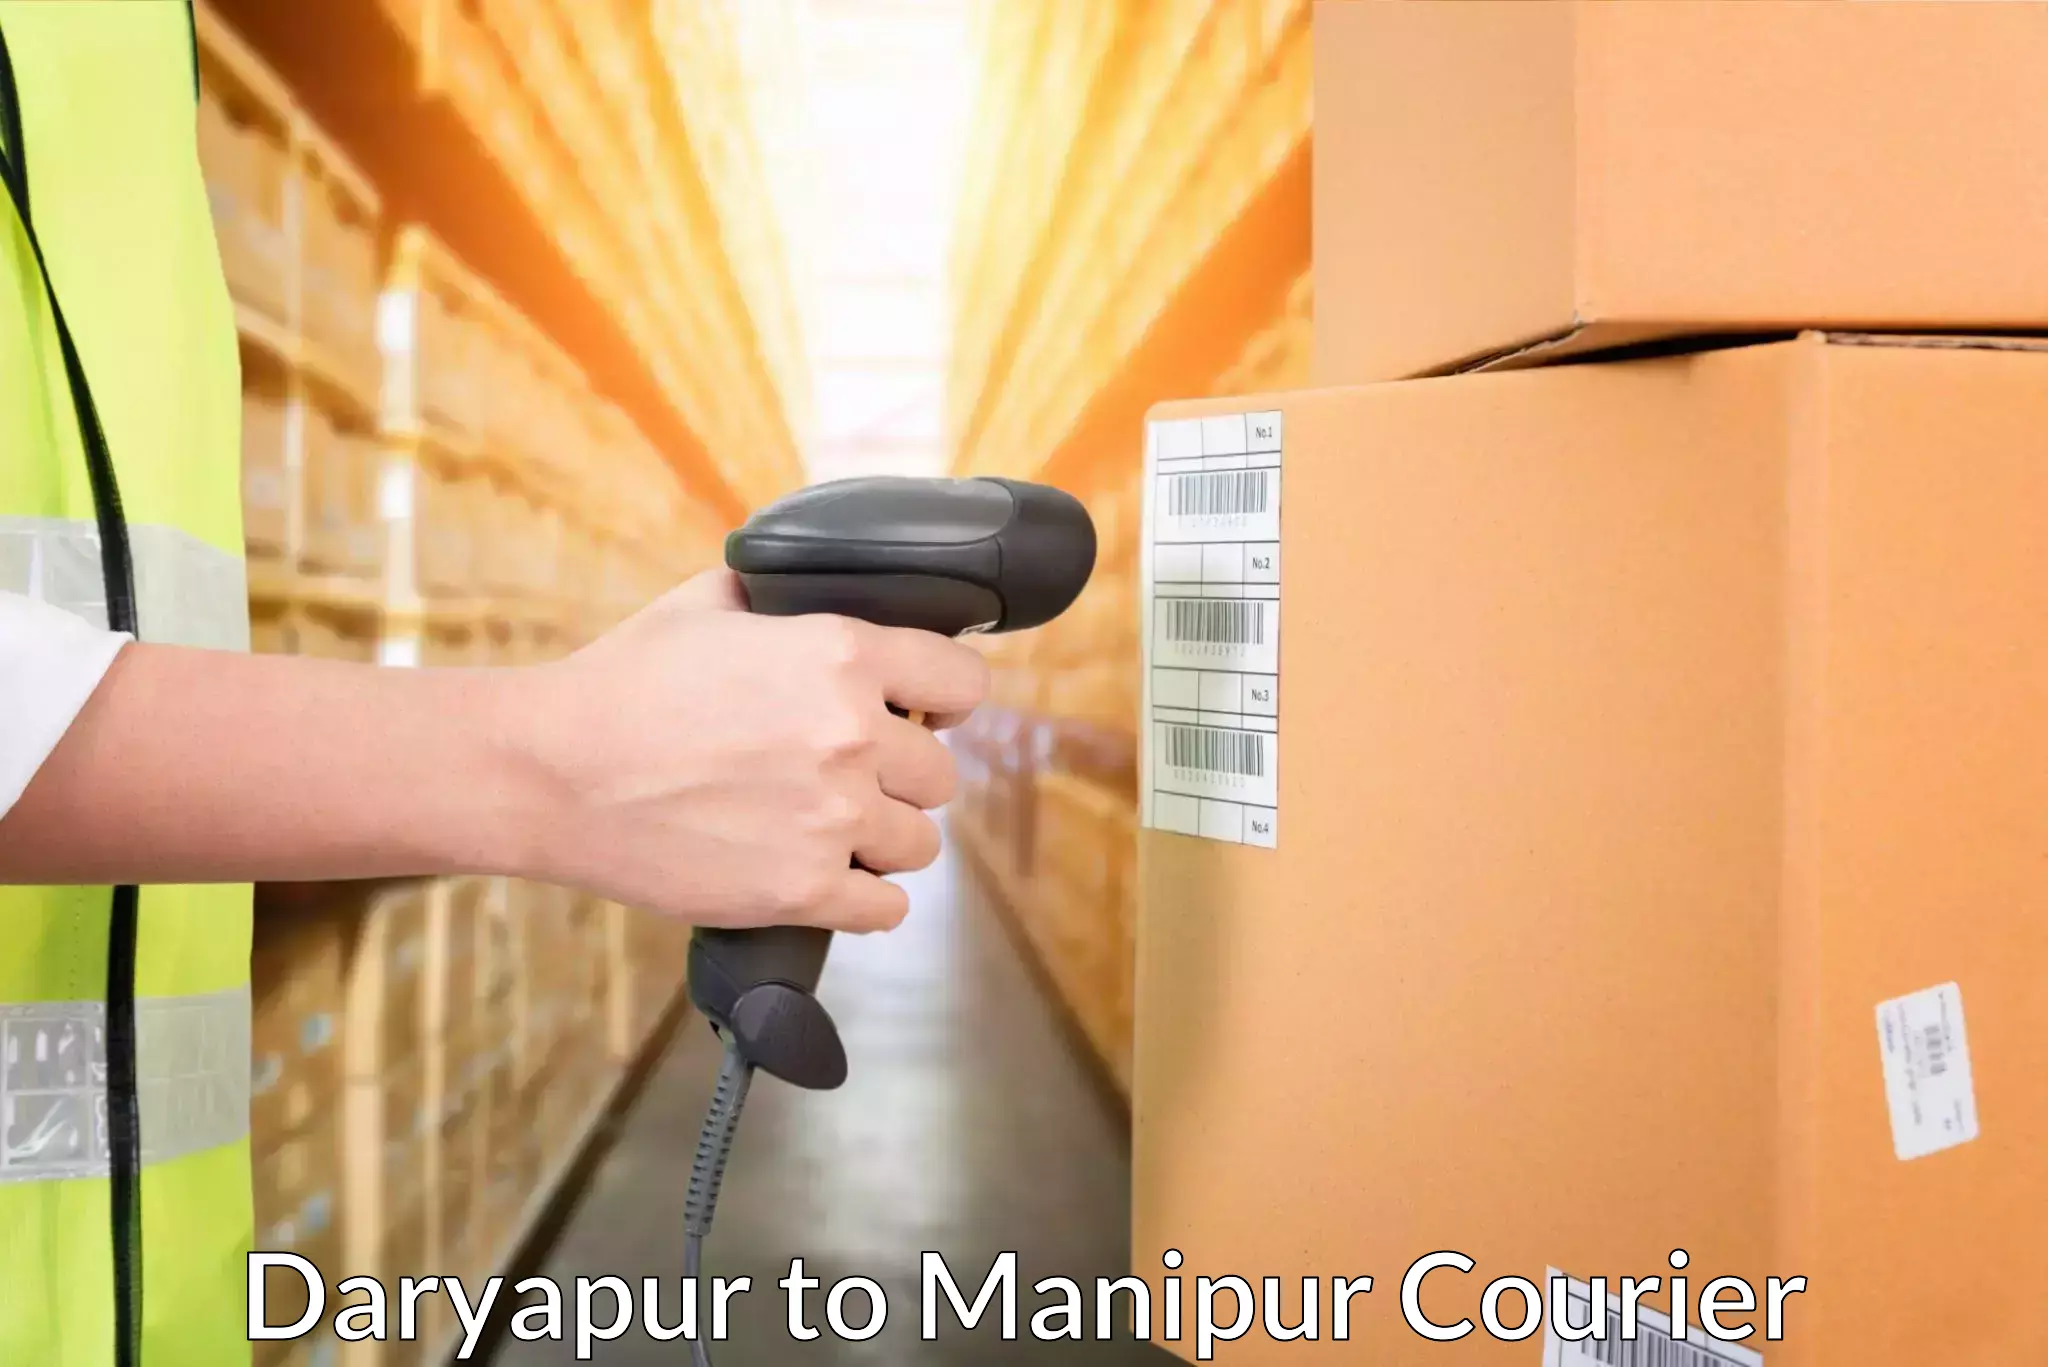 Next-day delivery options Daryapur to Manipur